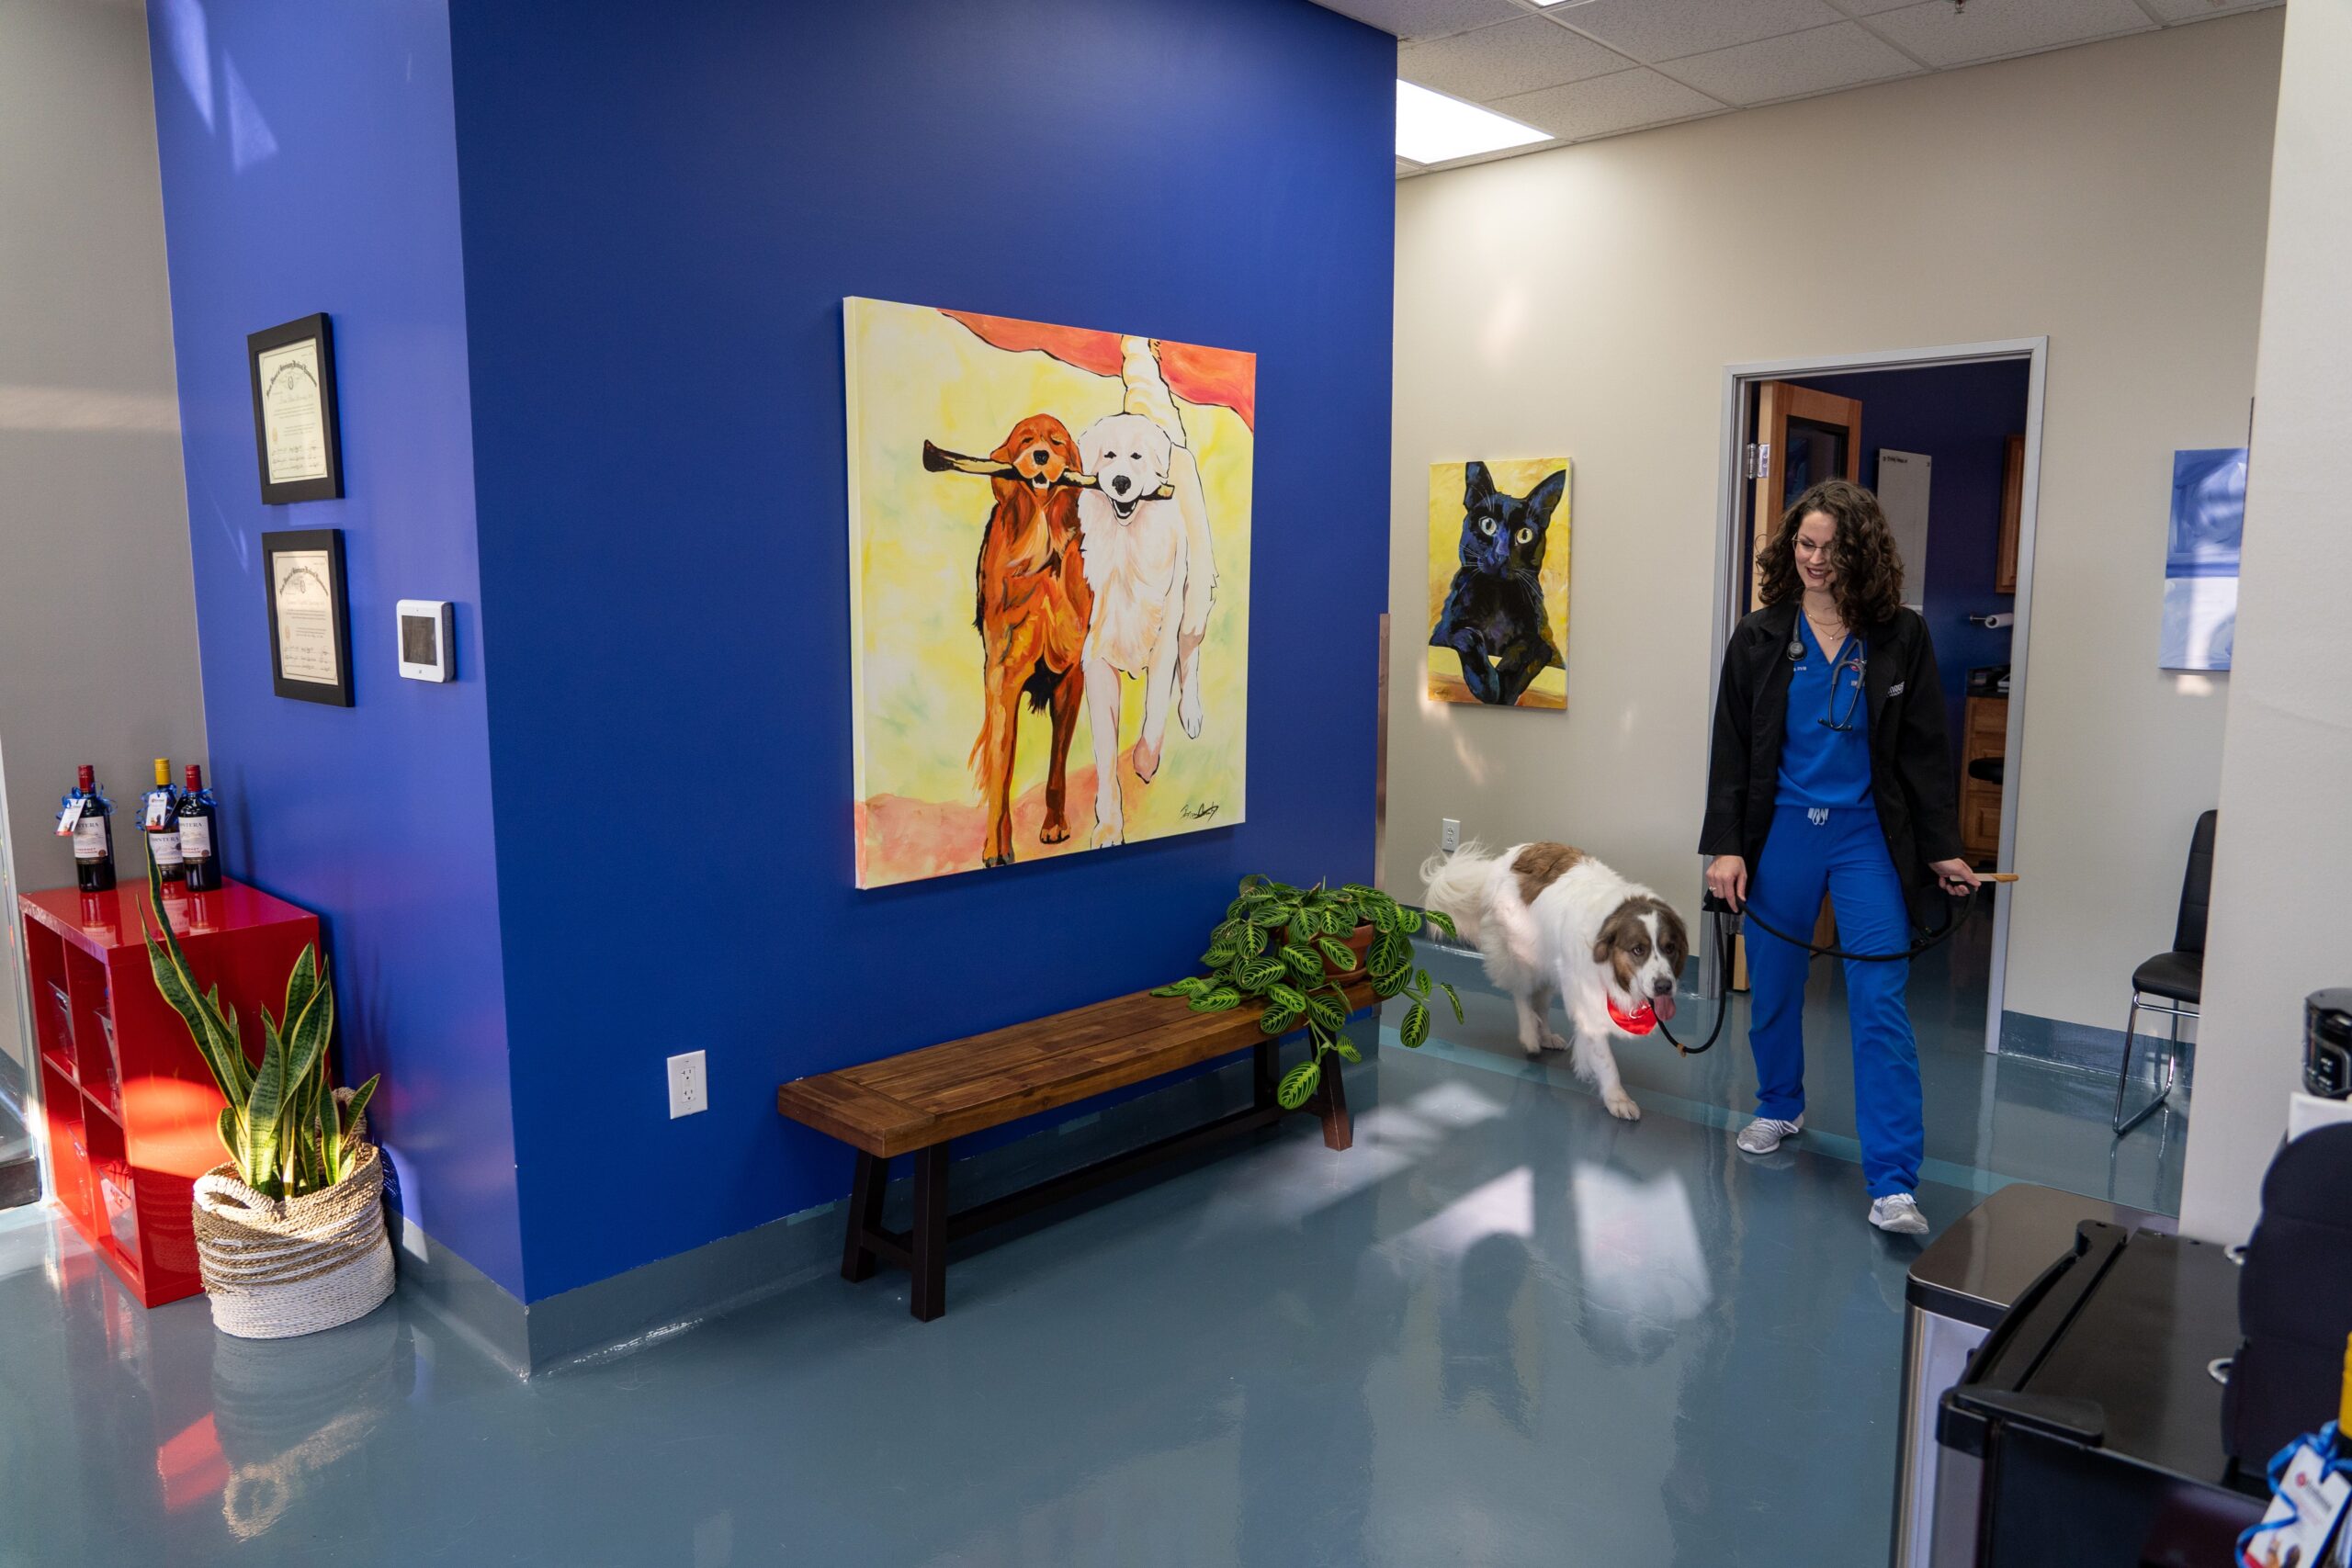 Dr Brianna Armstrong and dog